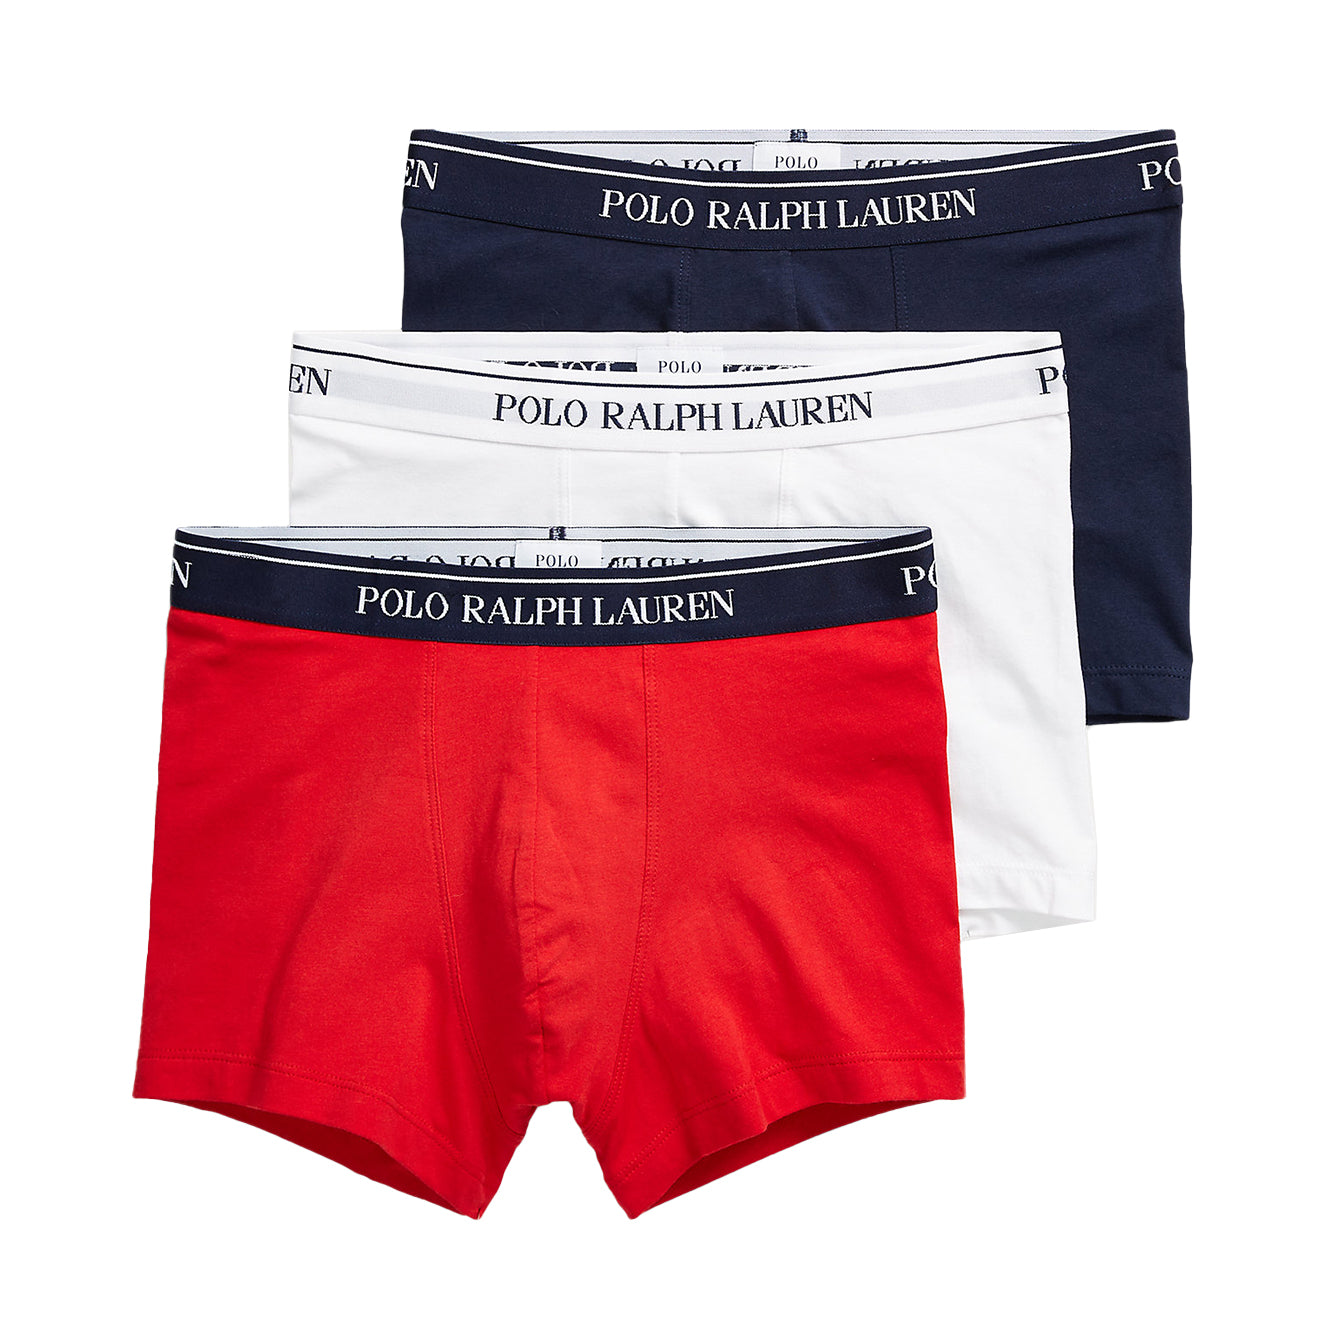 Polo Ralph Lauren Stretch Cotton Trunk 3-Pack White / Red / Black | The ...